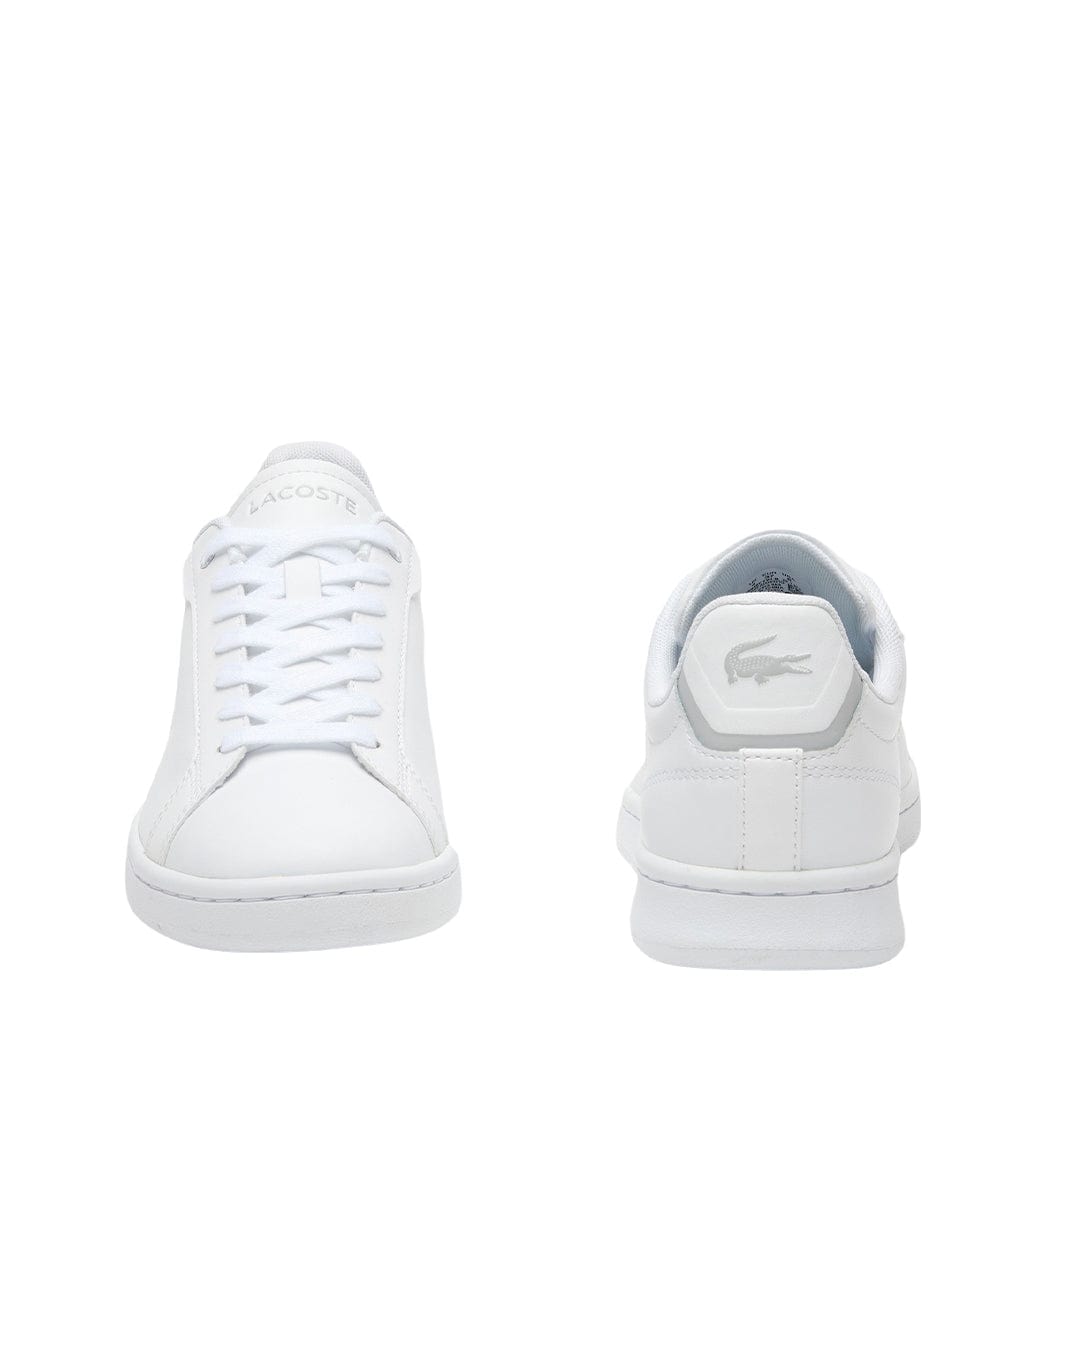 Lacoste Shoes Lacoste Carnaby Pro BL Tonal Leather Sneakers